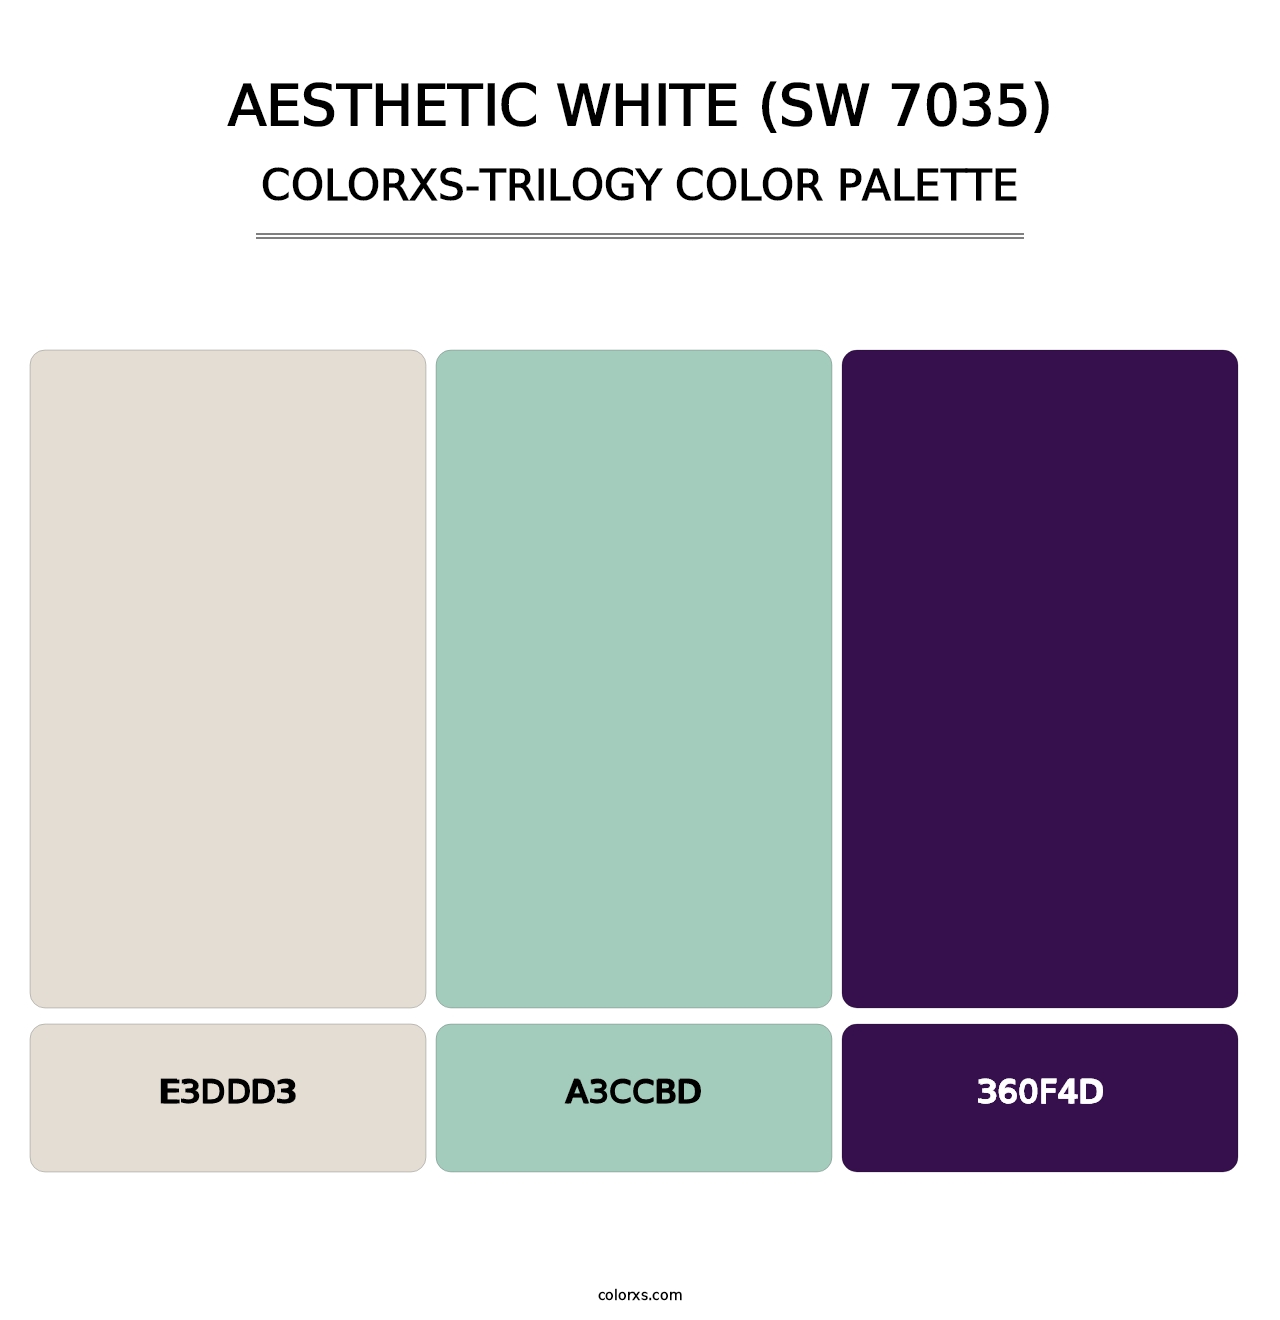 Aesthetic White (SW 7035) - Colorxs Trilogy Palette